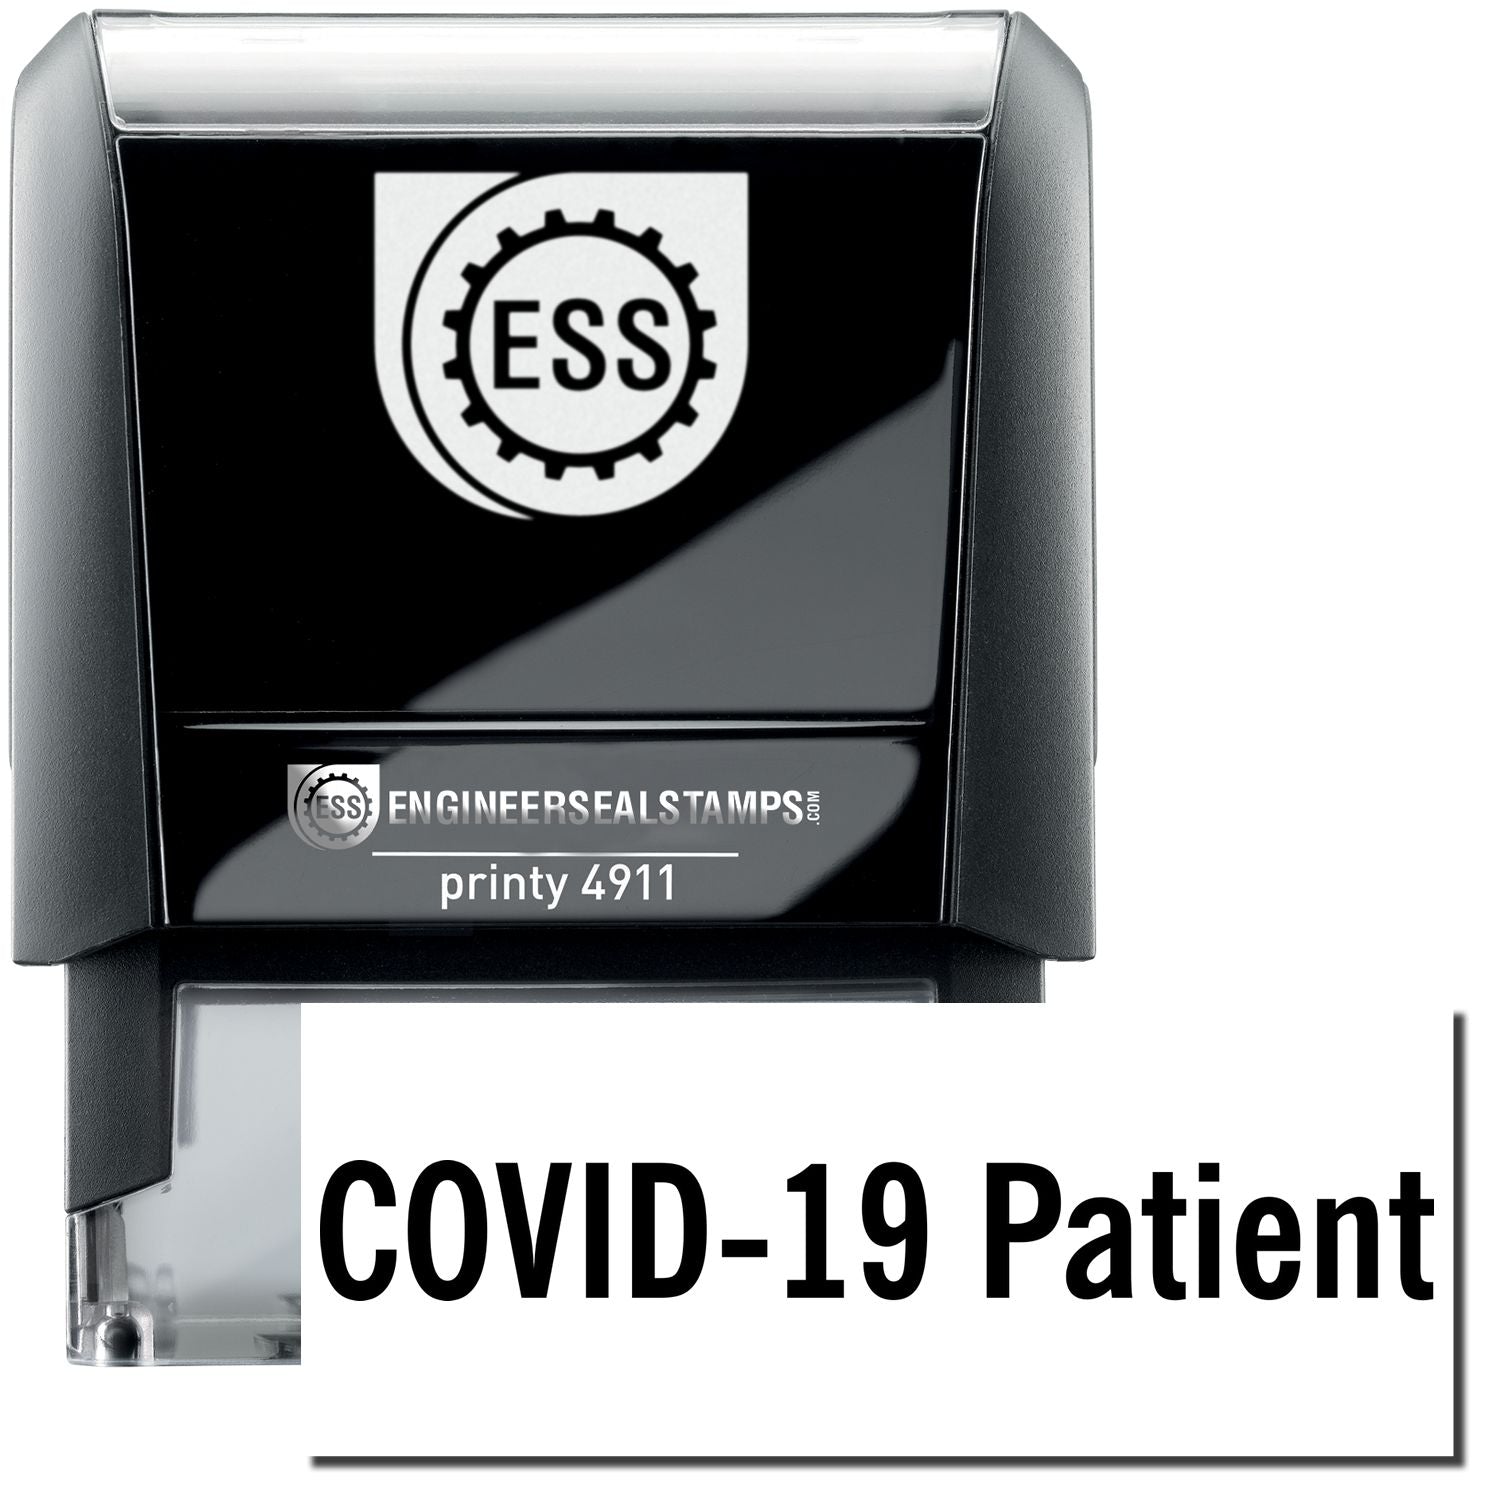 A self-inking stamp with a stamped image showing how the text "COVID-19 Patient" is displayed after stamping.